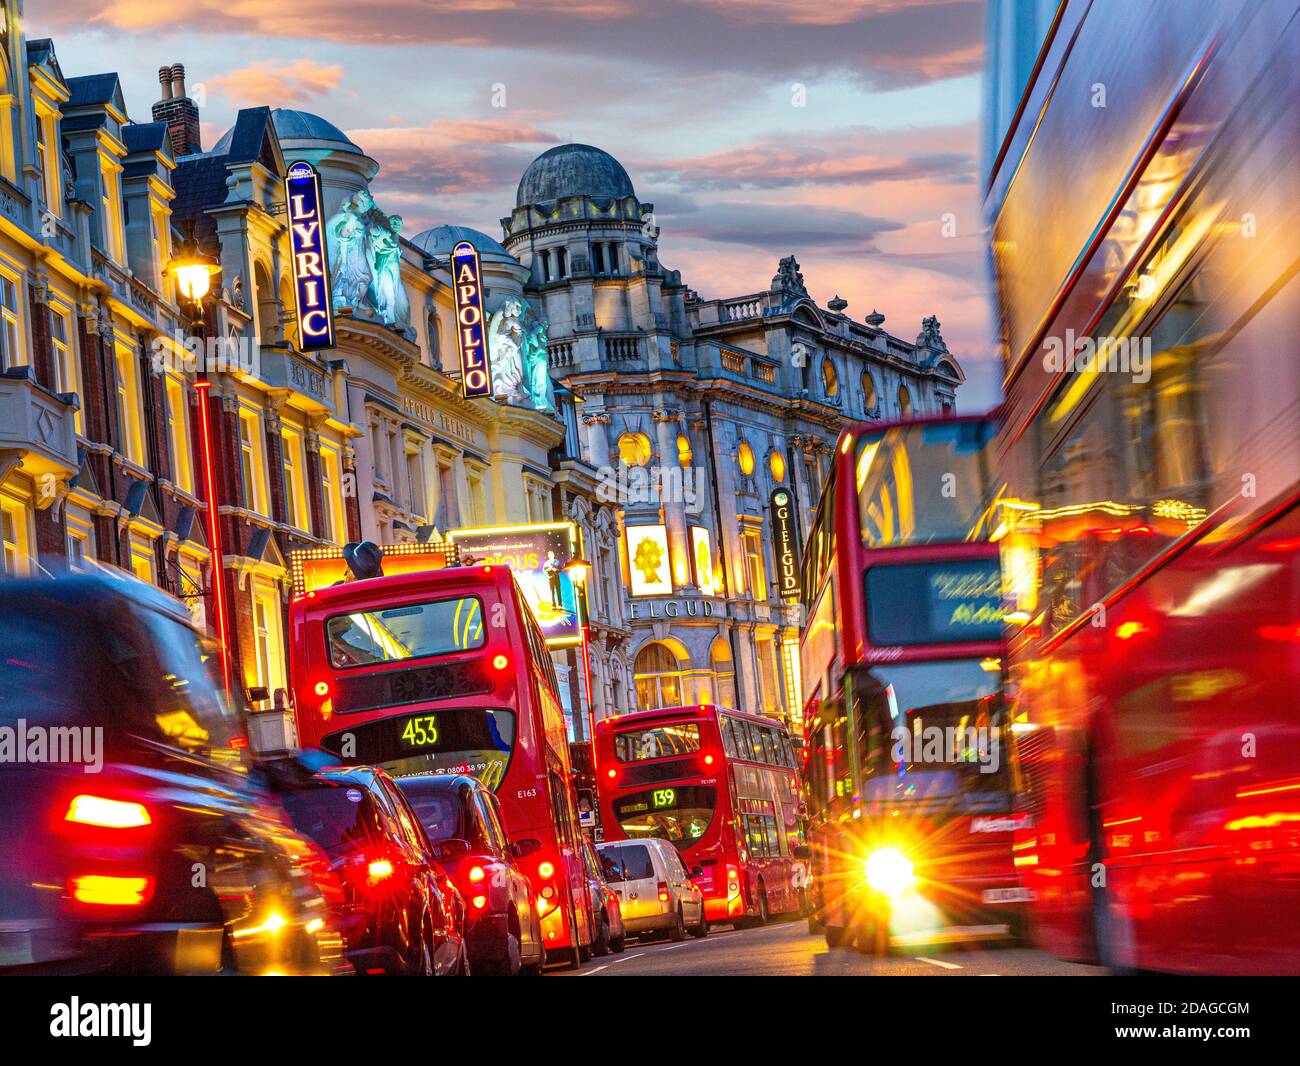 LONDON THEATRES SHAFTESBURY AVENUE NIGHT ULEZ LONDON TRAFFIC JAM SUNSET Theatreland traffic pollution blurred busy with red buses and taxis in Shaftesbury Avenue with Lyric Apollo & Gielgud Theatres featured West End London UK Stock Photo